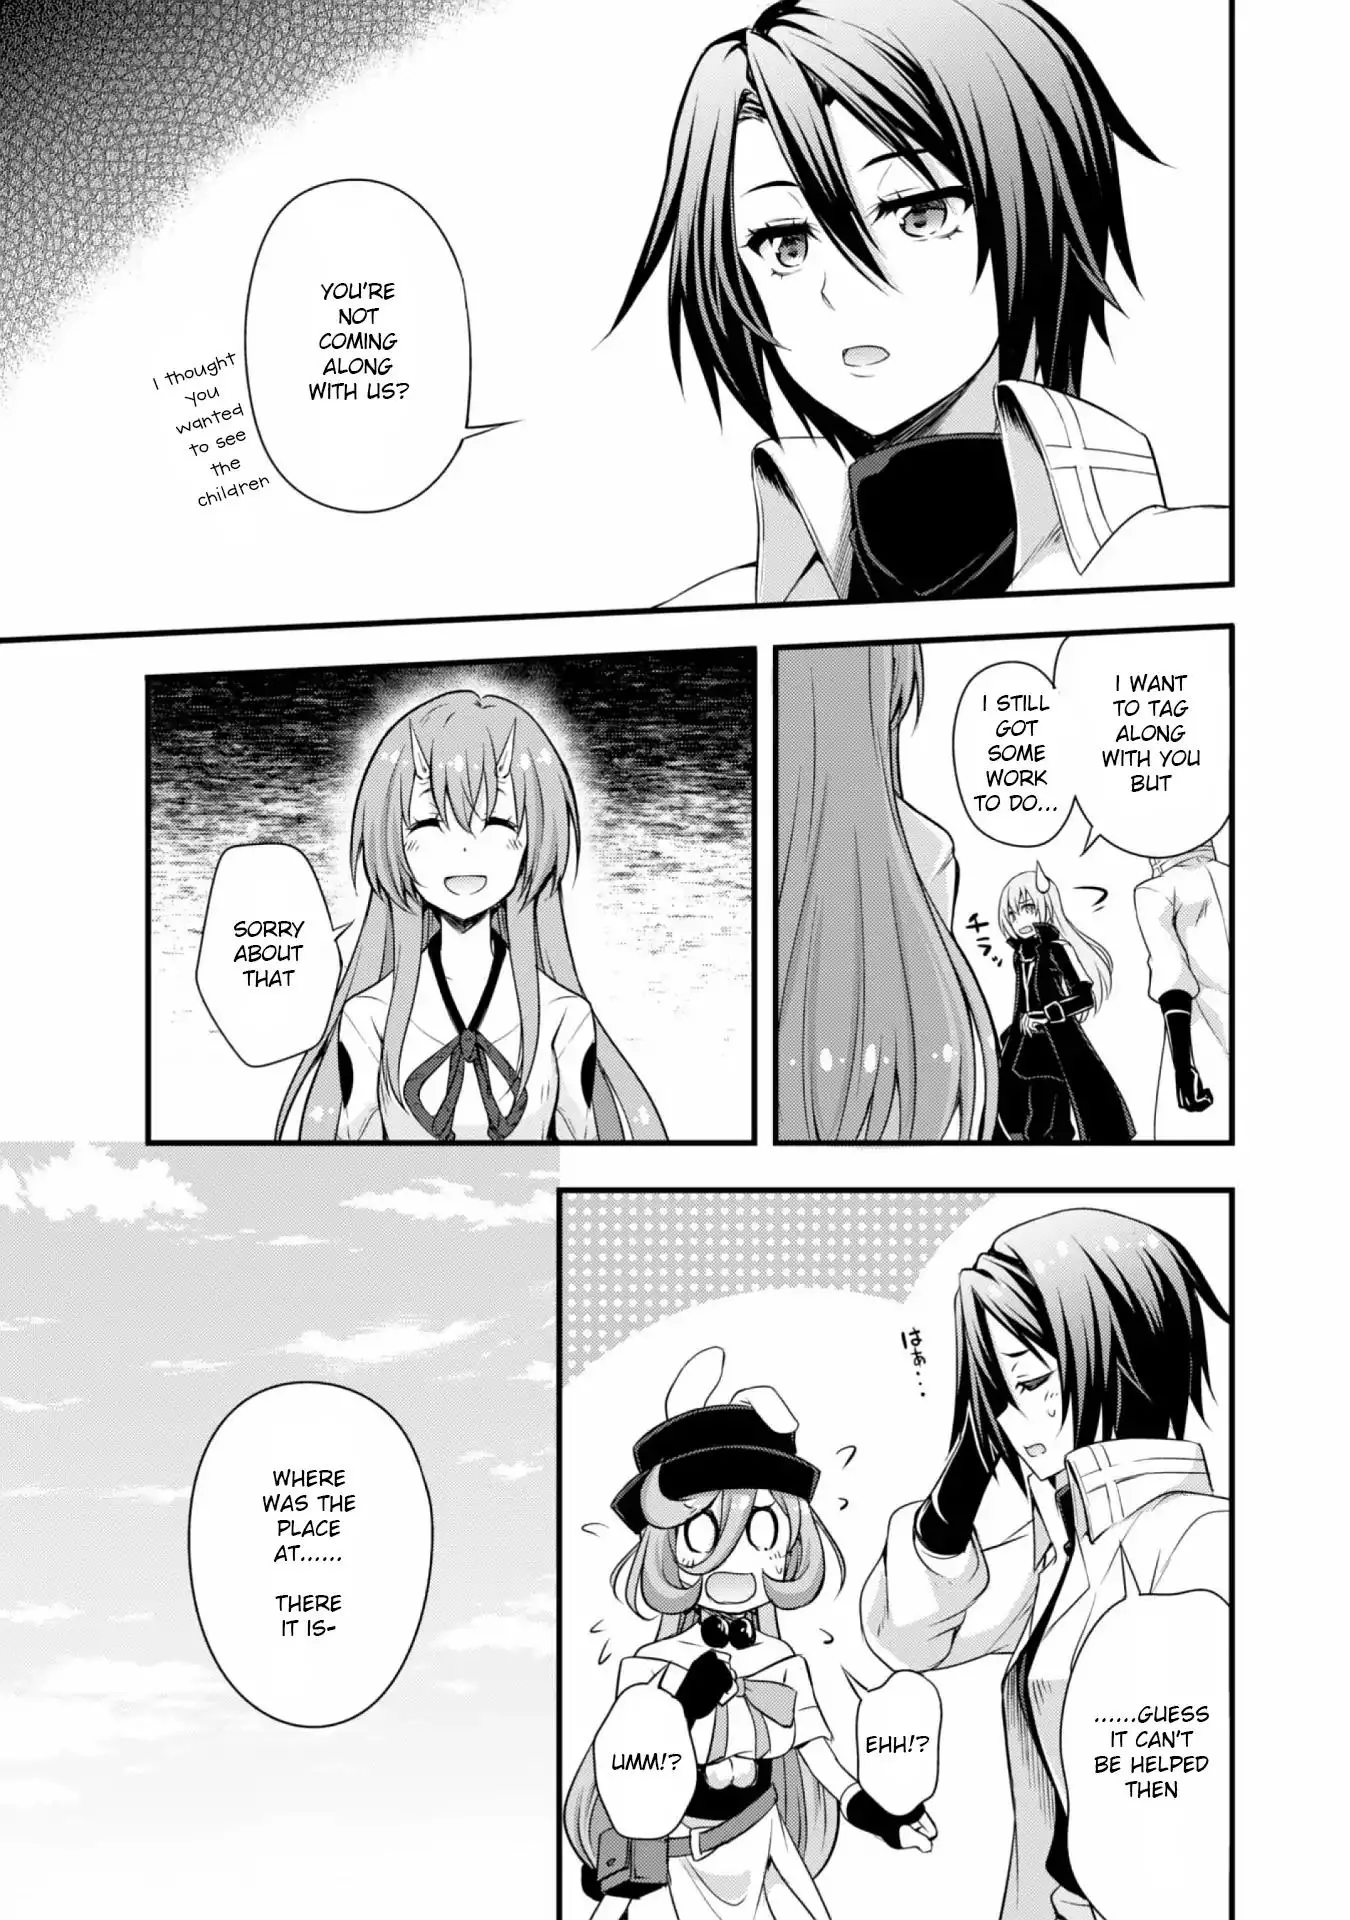 Tensei Shitara Slime Datta Ken: The Ways of Strolling in the Demon Country - 14 page 2